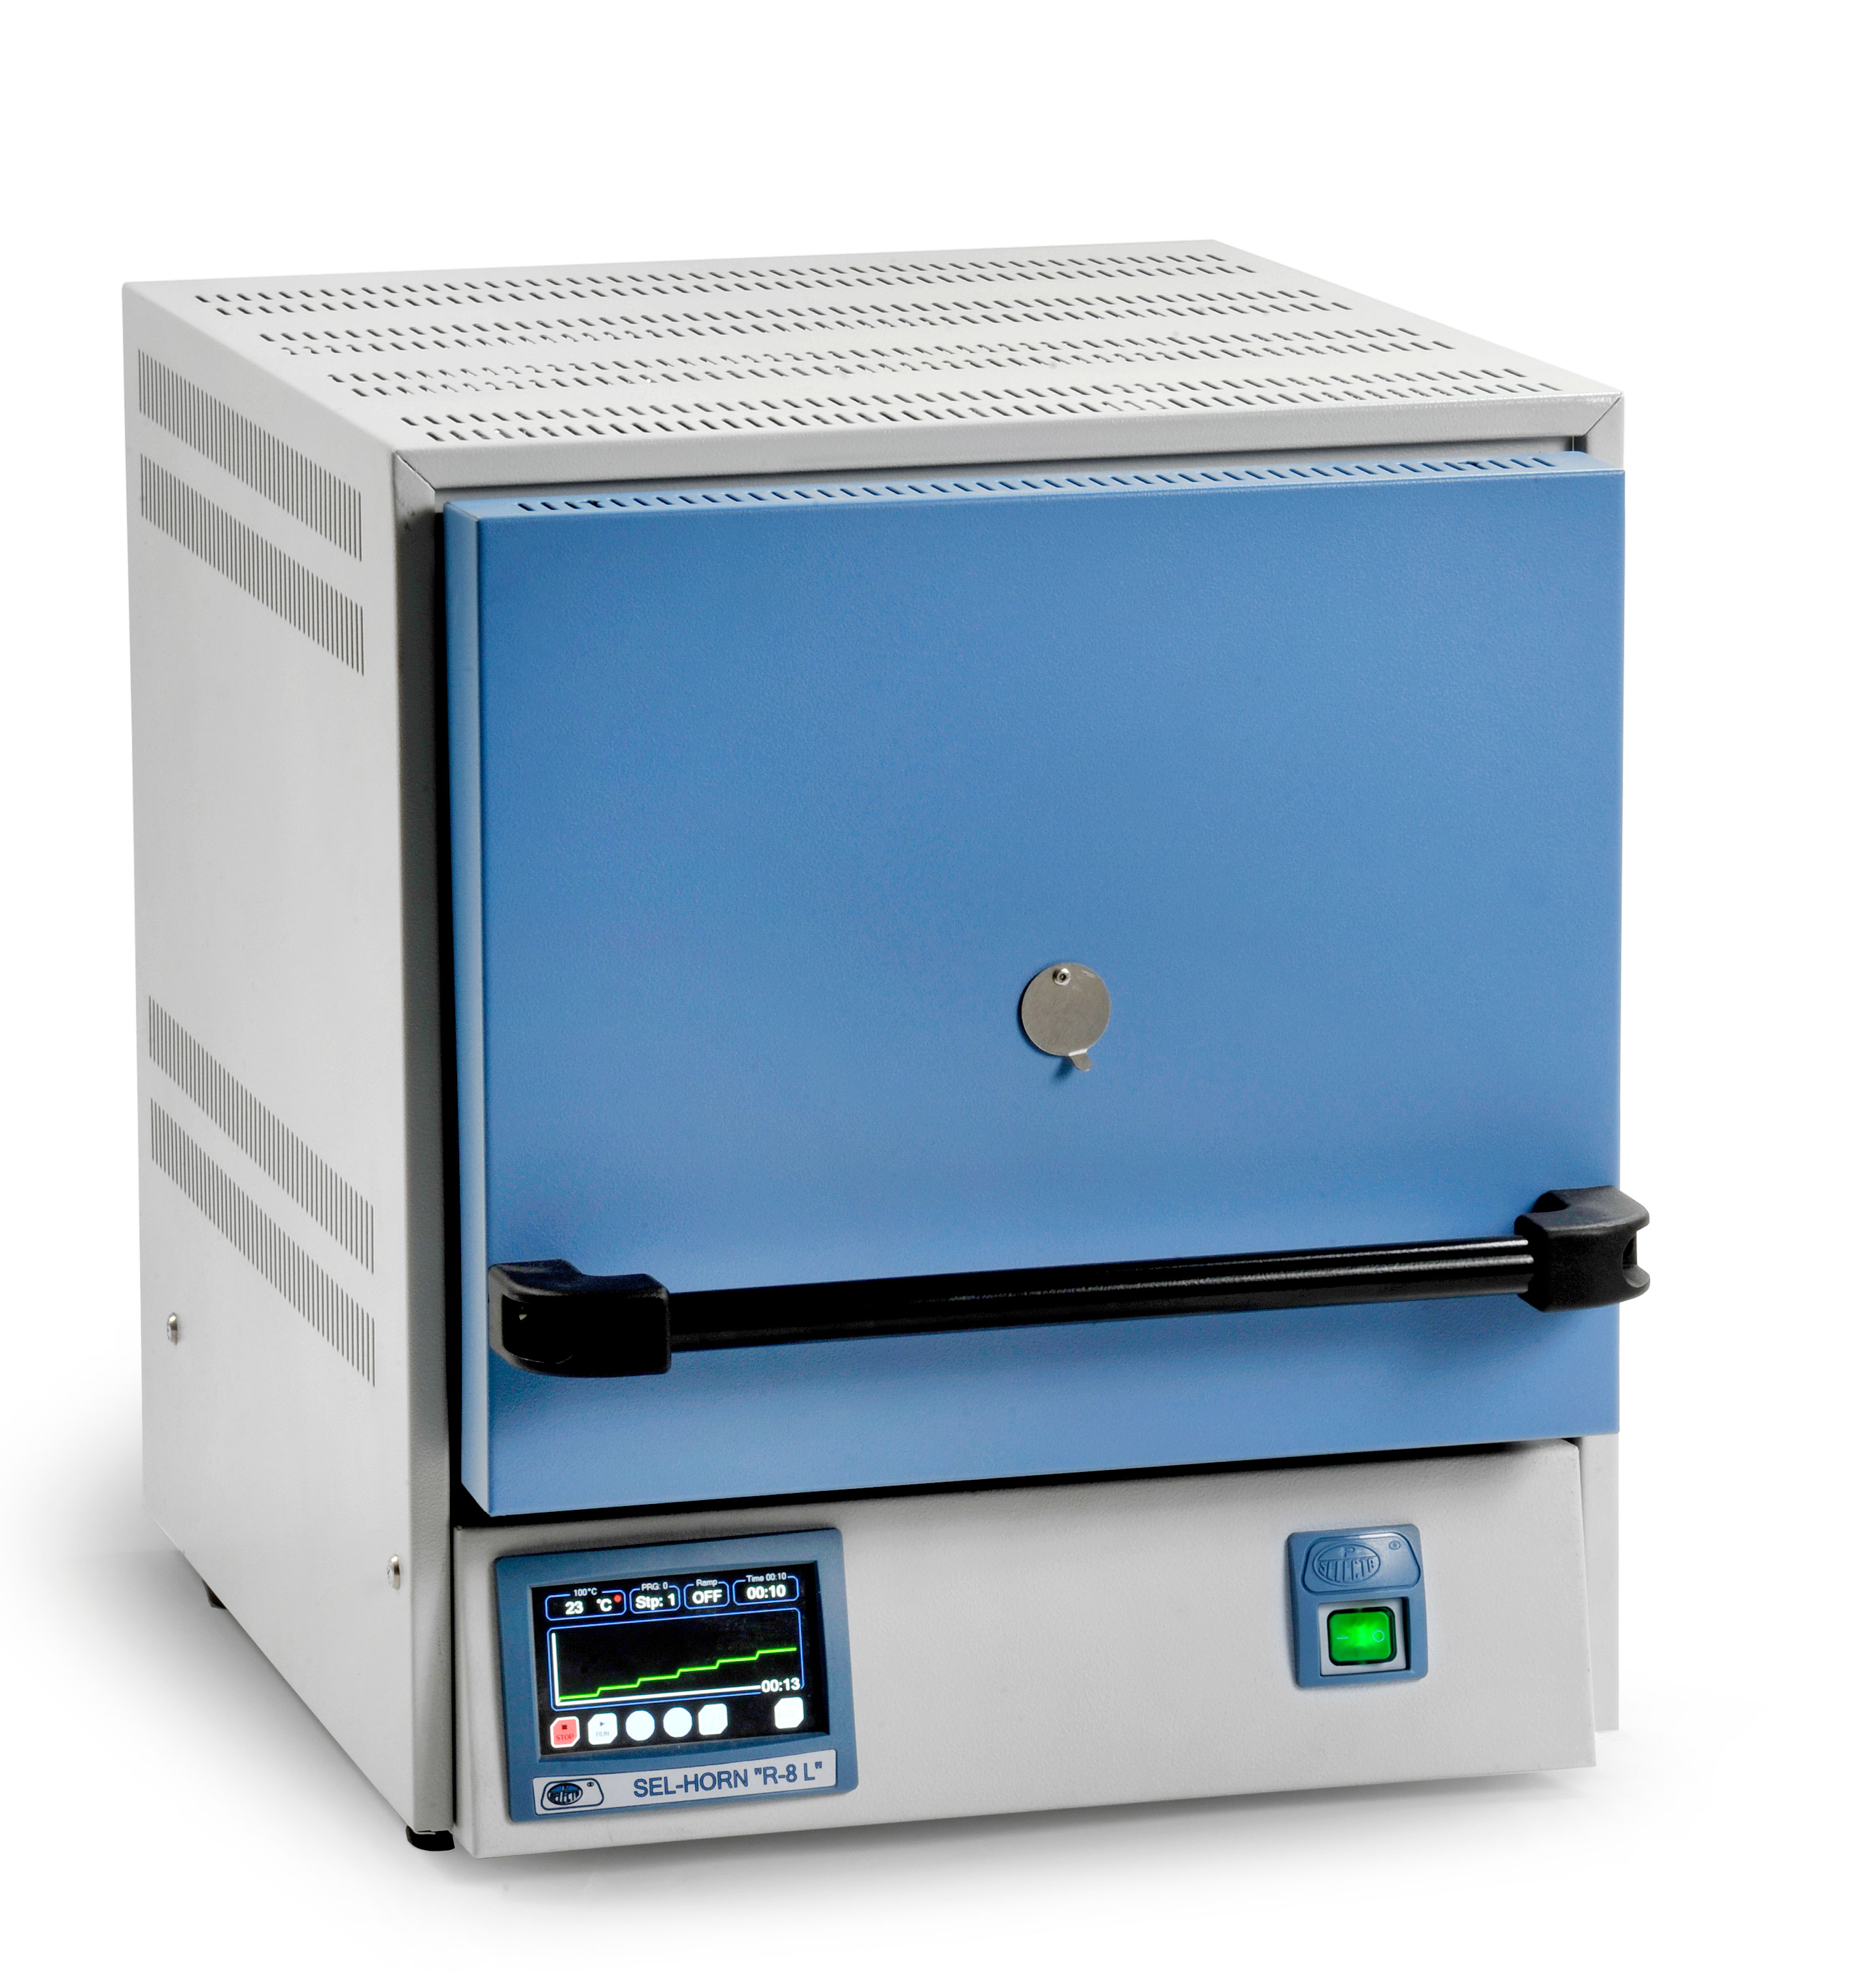 Electric muffle furnace R-8 L adjustable by touchable TFT screen up to 1100ºC. Precision ±2 °C. Capacity 8L. Ext Dim WxHxD (mm): 340x430x470.